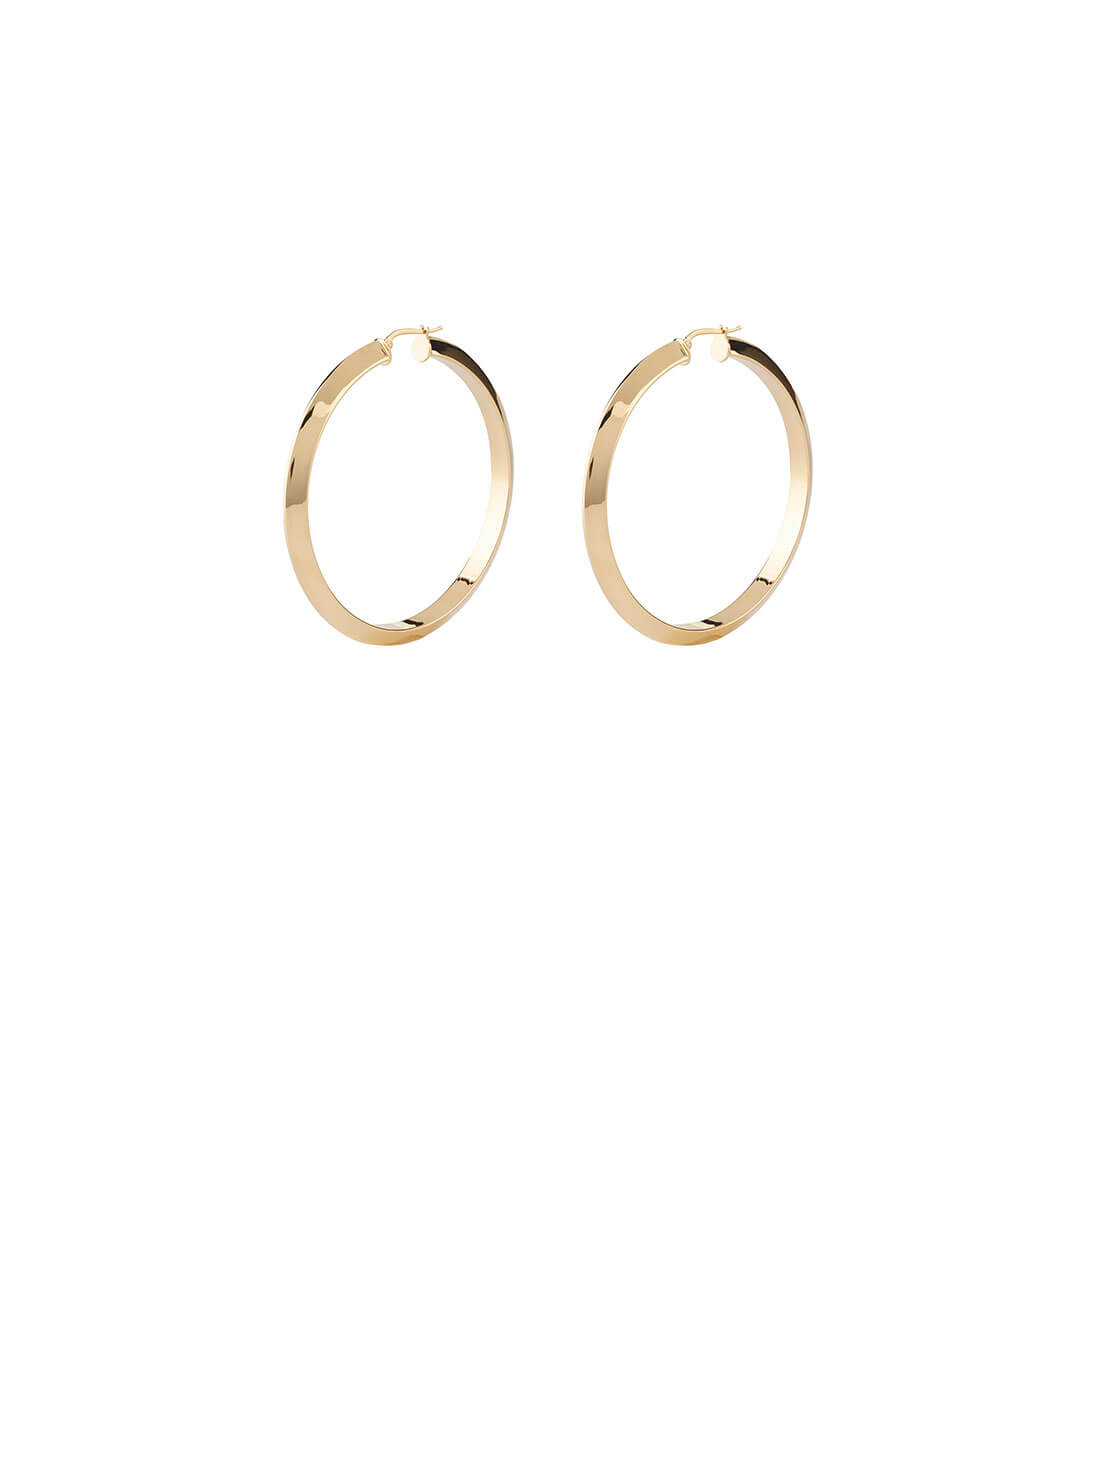 Gold I Did It Again Hoop Earrings | GUESS Women's Jewellery | front view